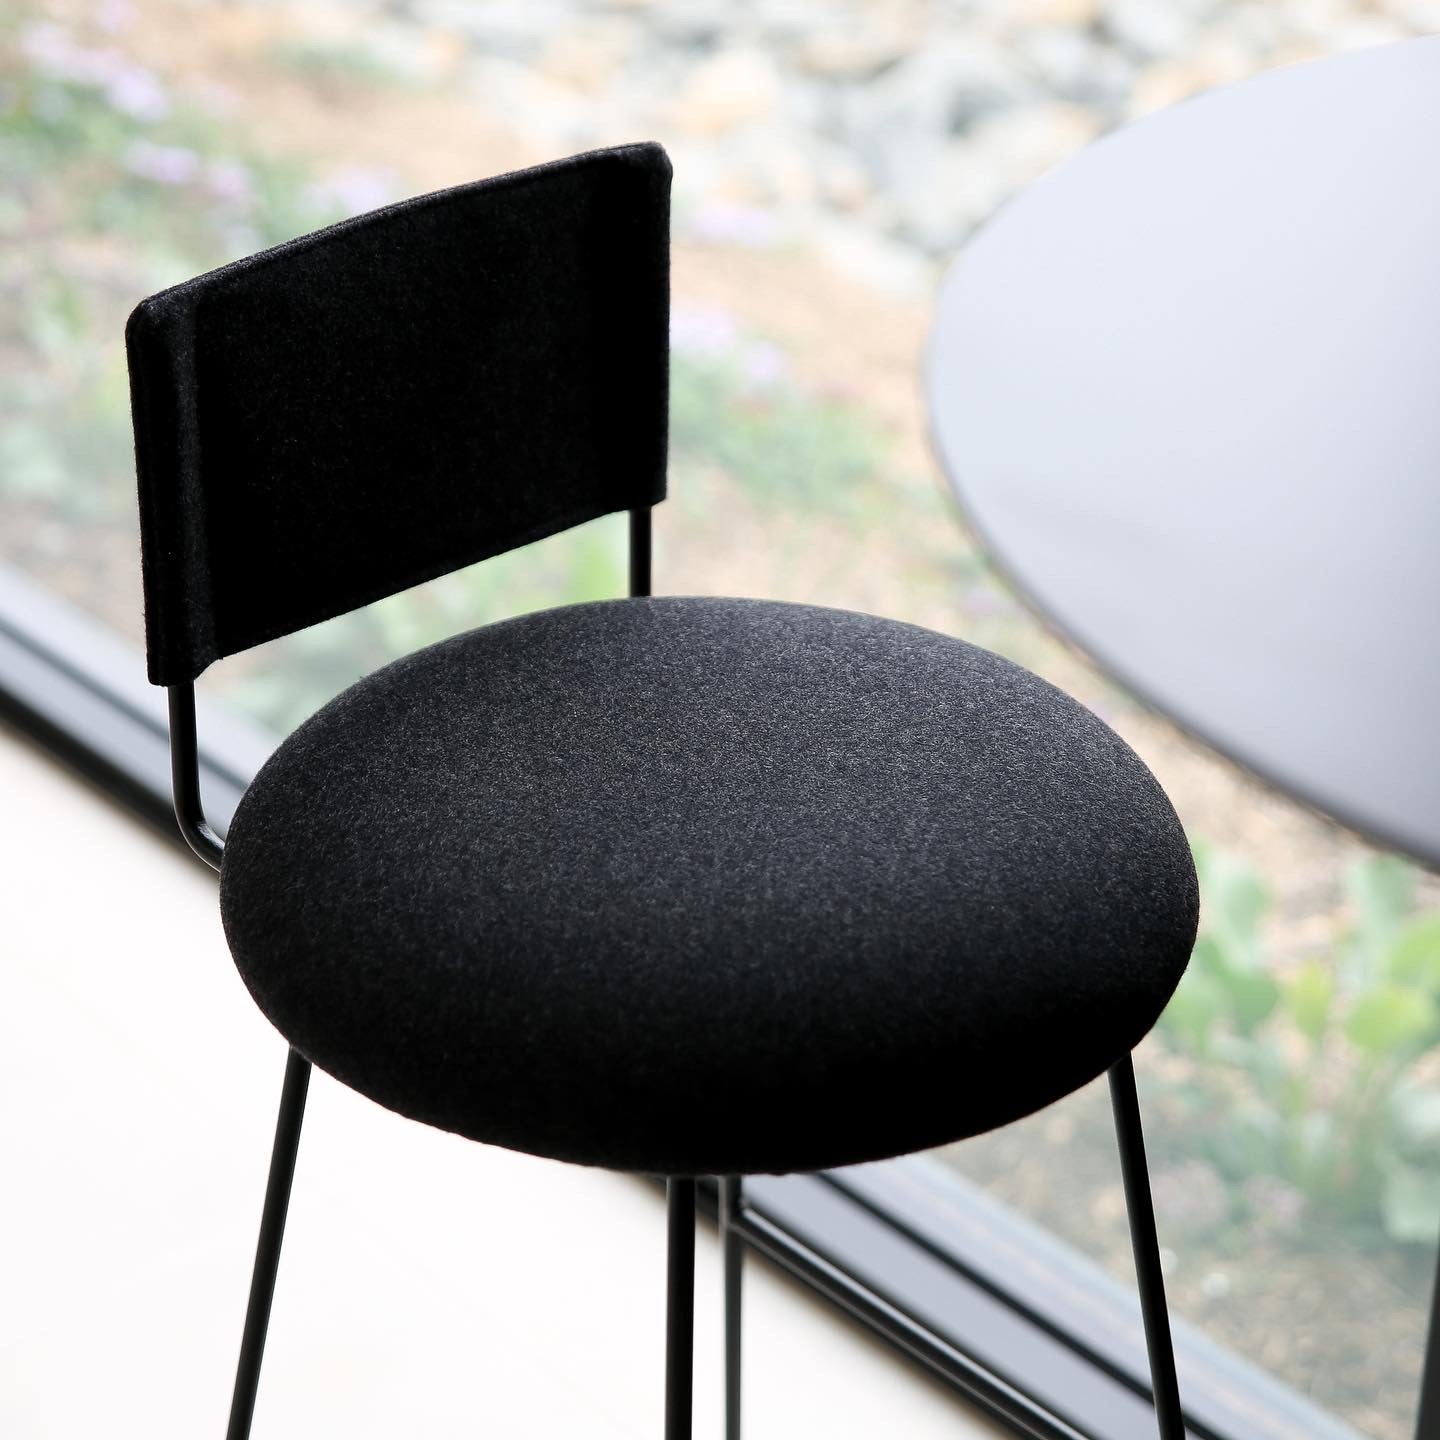 Backed FINE soft top stool